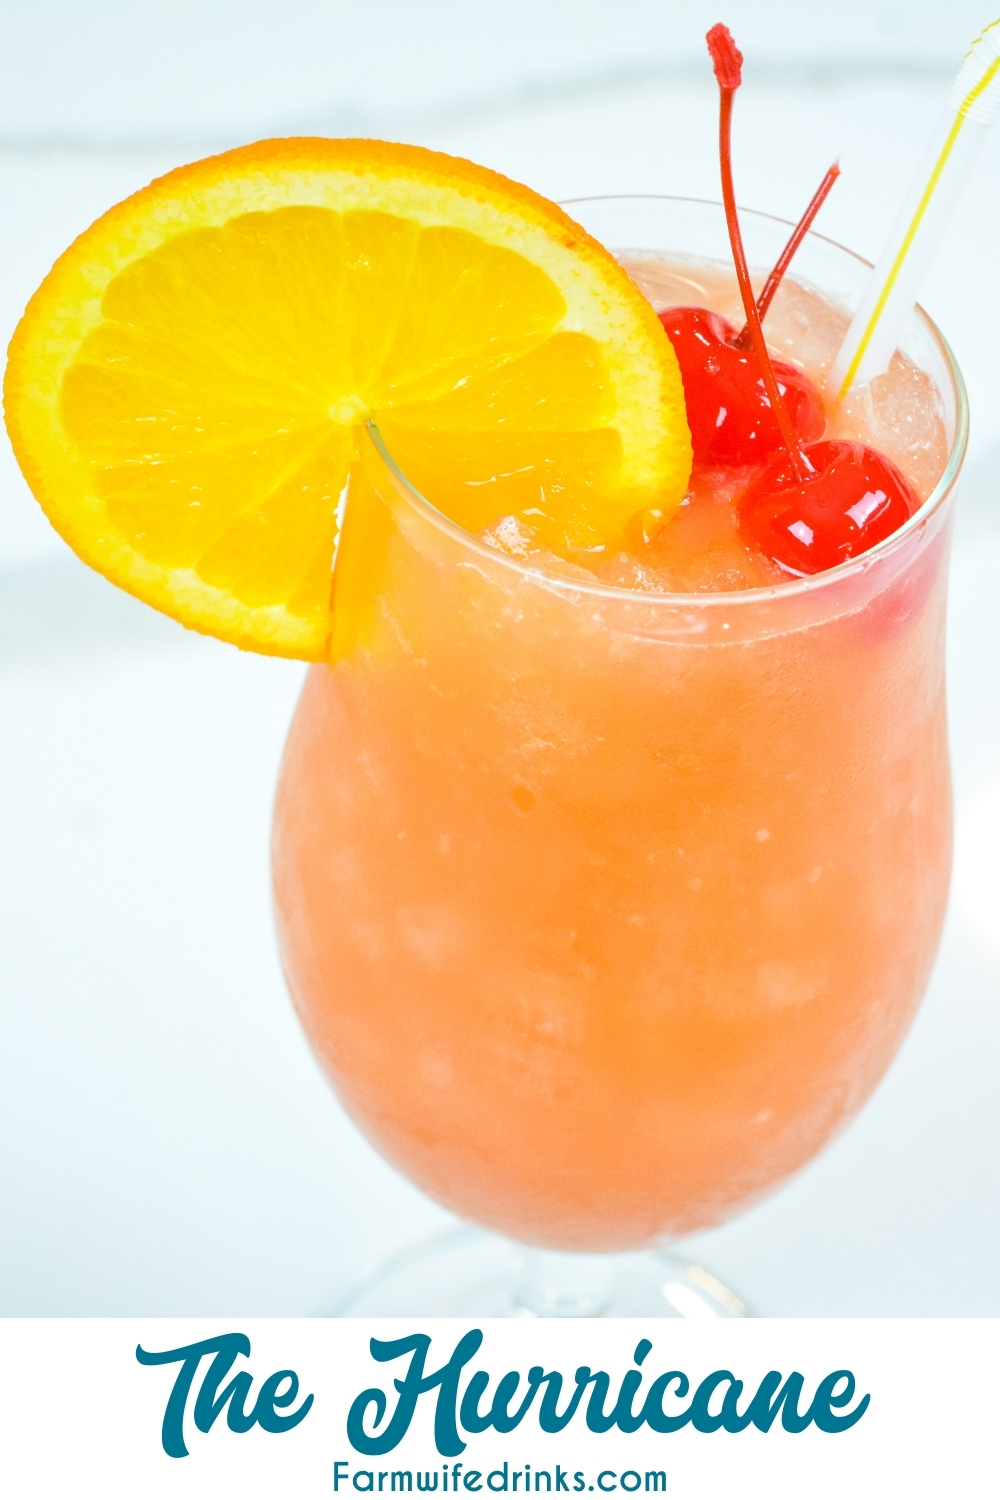 The New Orleans Hurricane Drink can be made at home with light and dark rum, passion fruit juice, orange juice, and grenadine. Top it off with a simple orange slice and maraschino cherries.